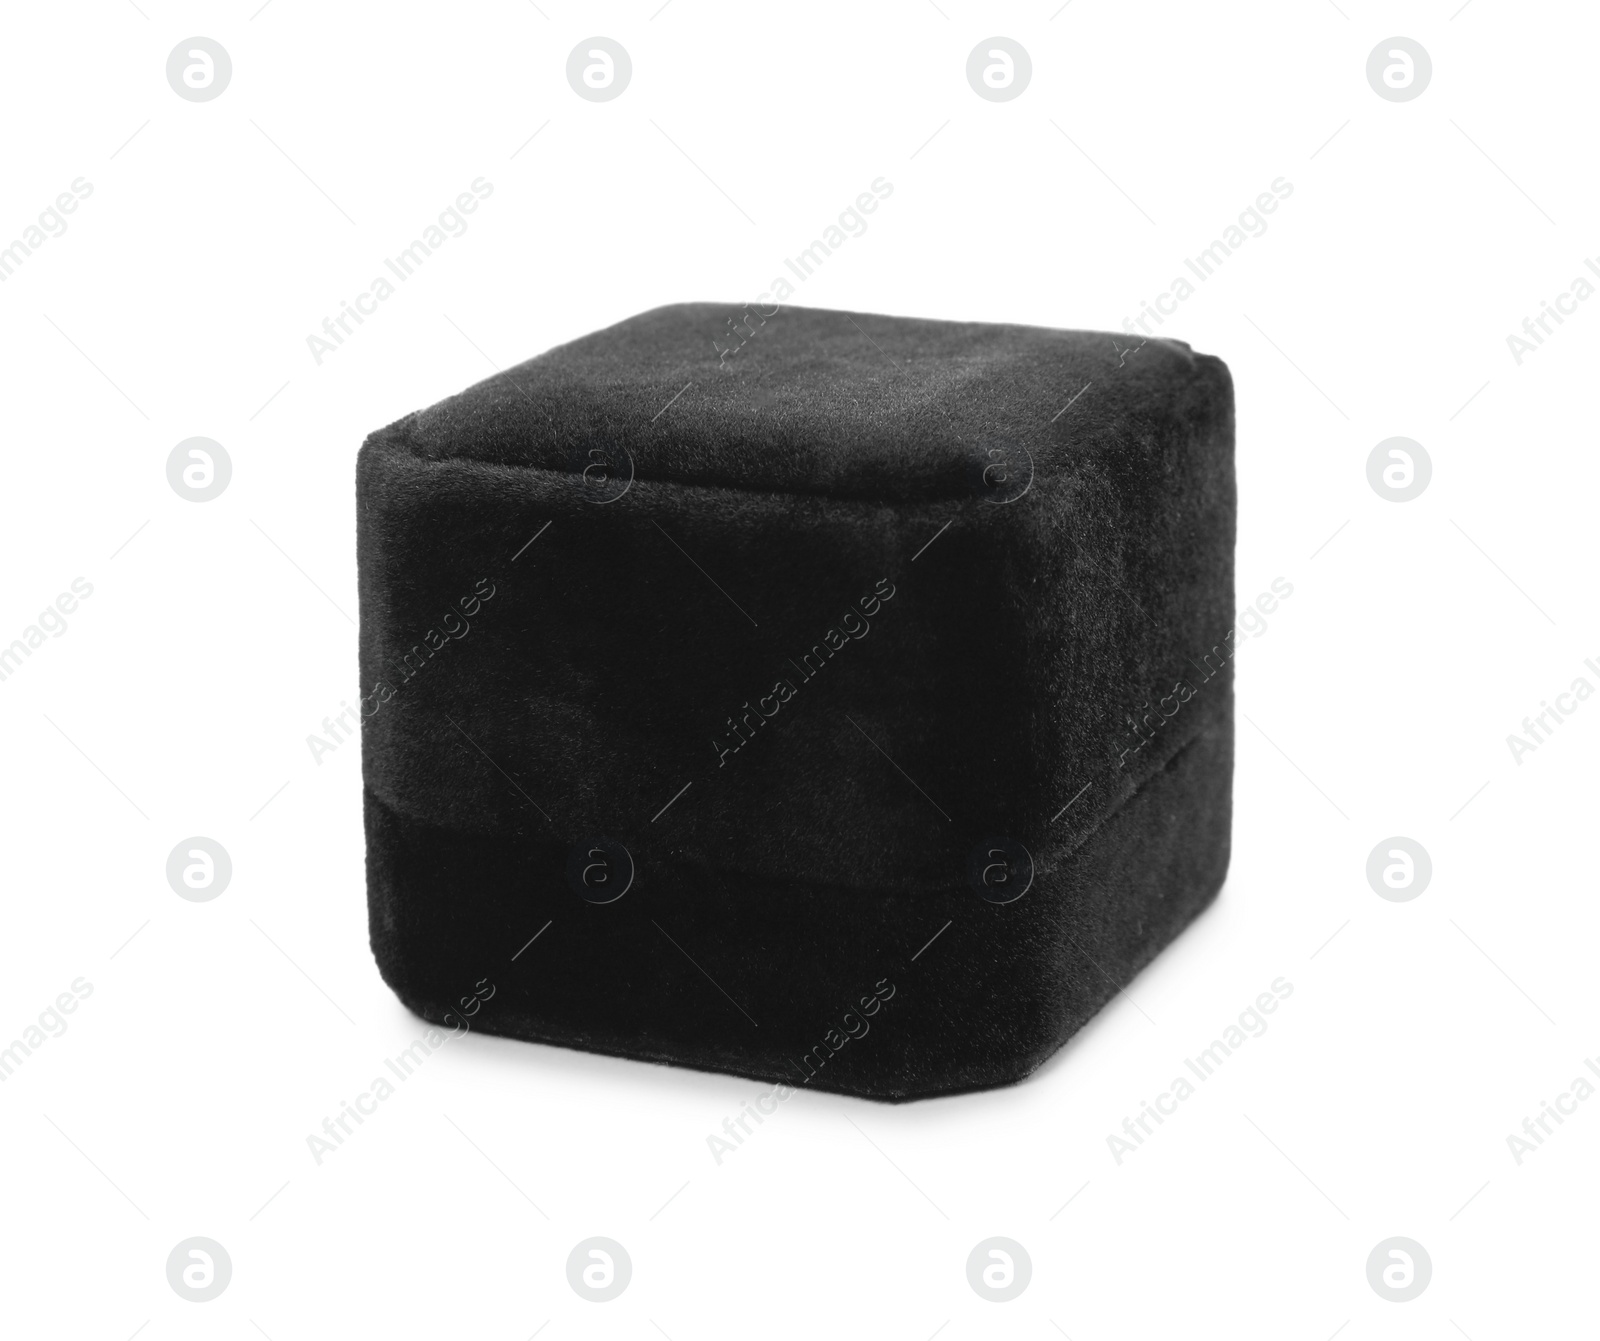 Photo of Closed black ring box isolated on white